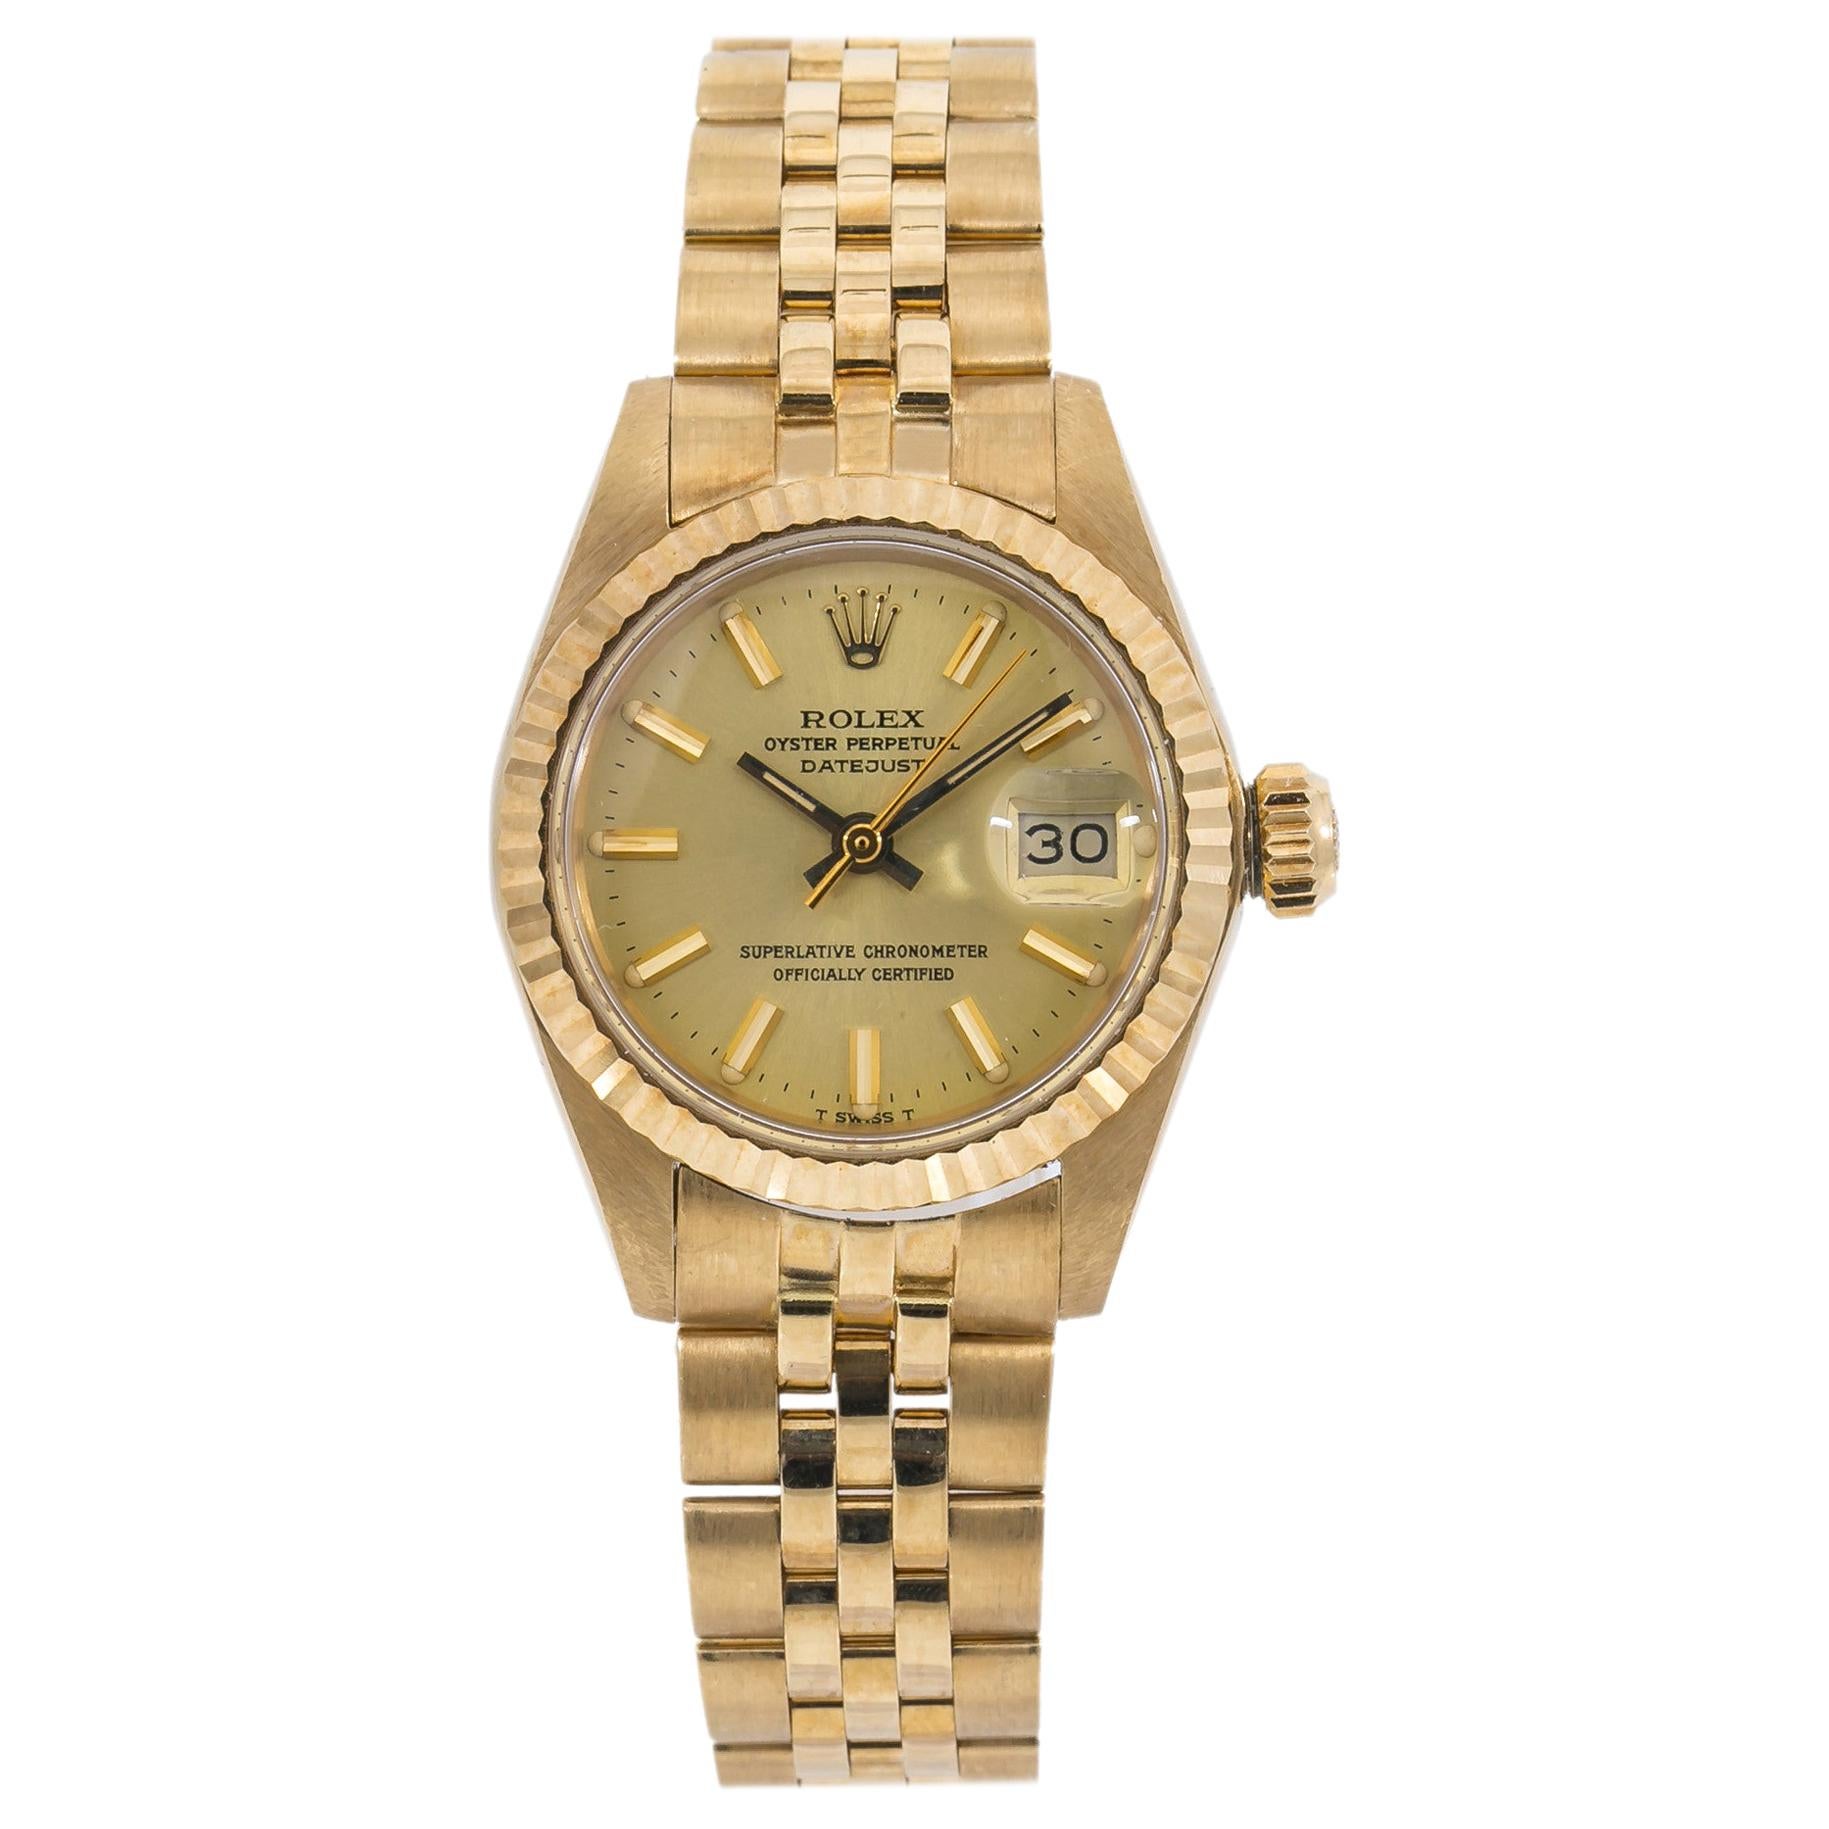 Rolex Datejust 6917 Ladies Automatic Watch 18 Karat Gold Champagne with Papers